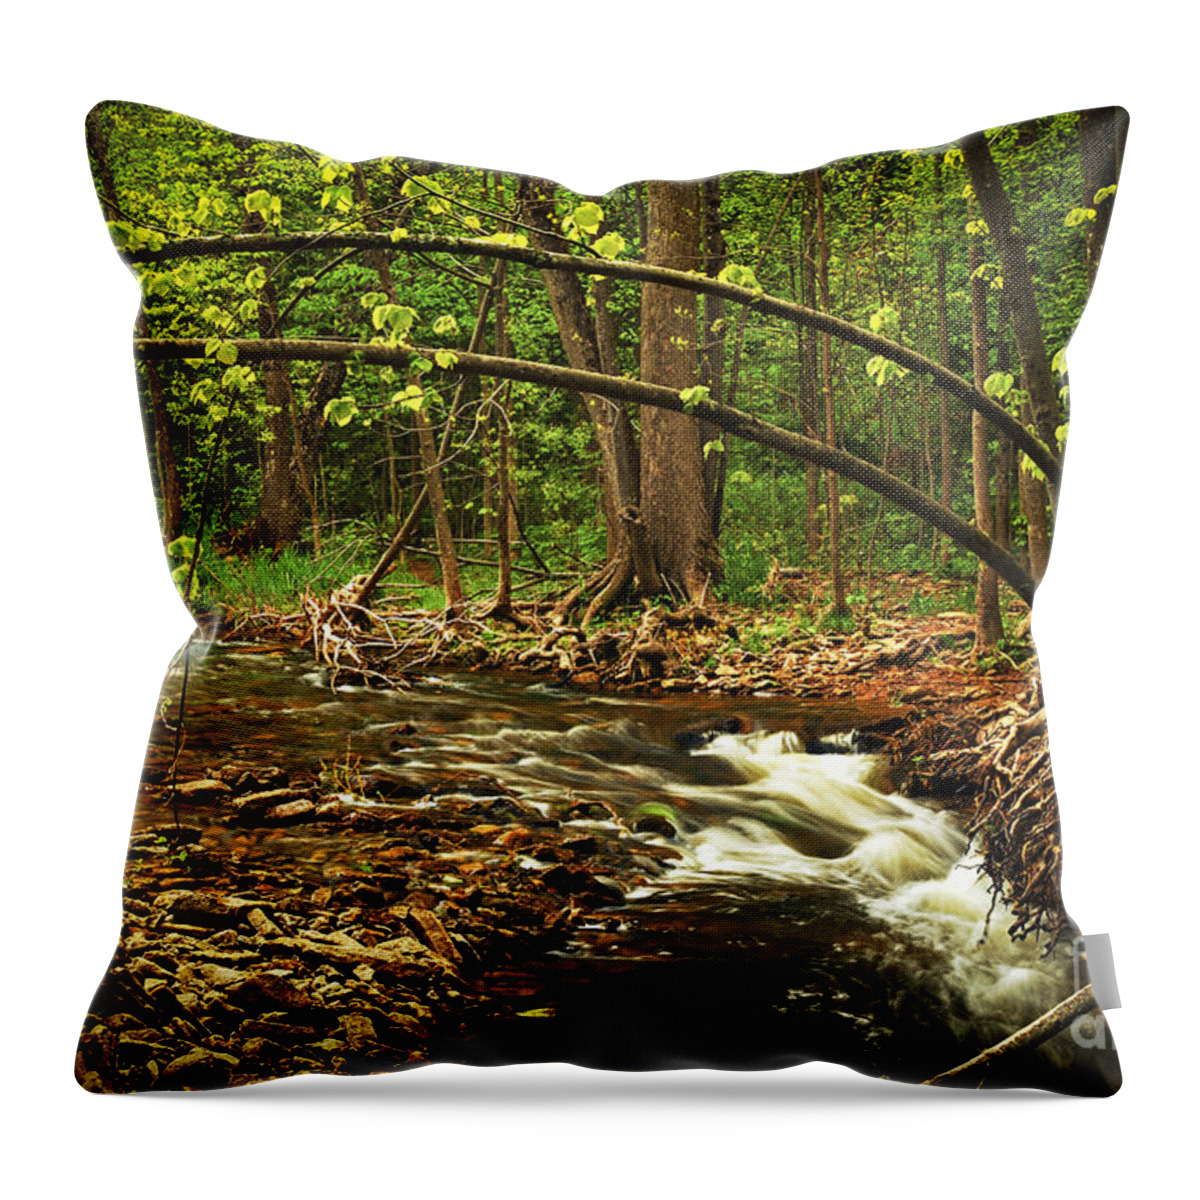 Waterfall Throw Pillow featuring the photograph Forest river by Elena Elisseeva